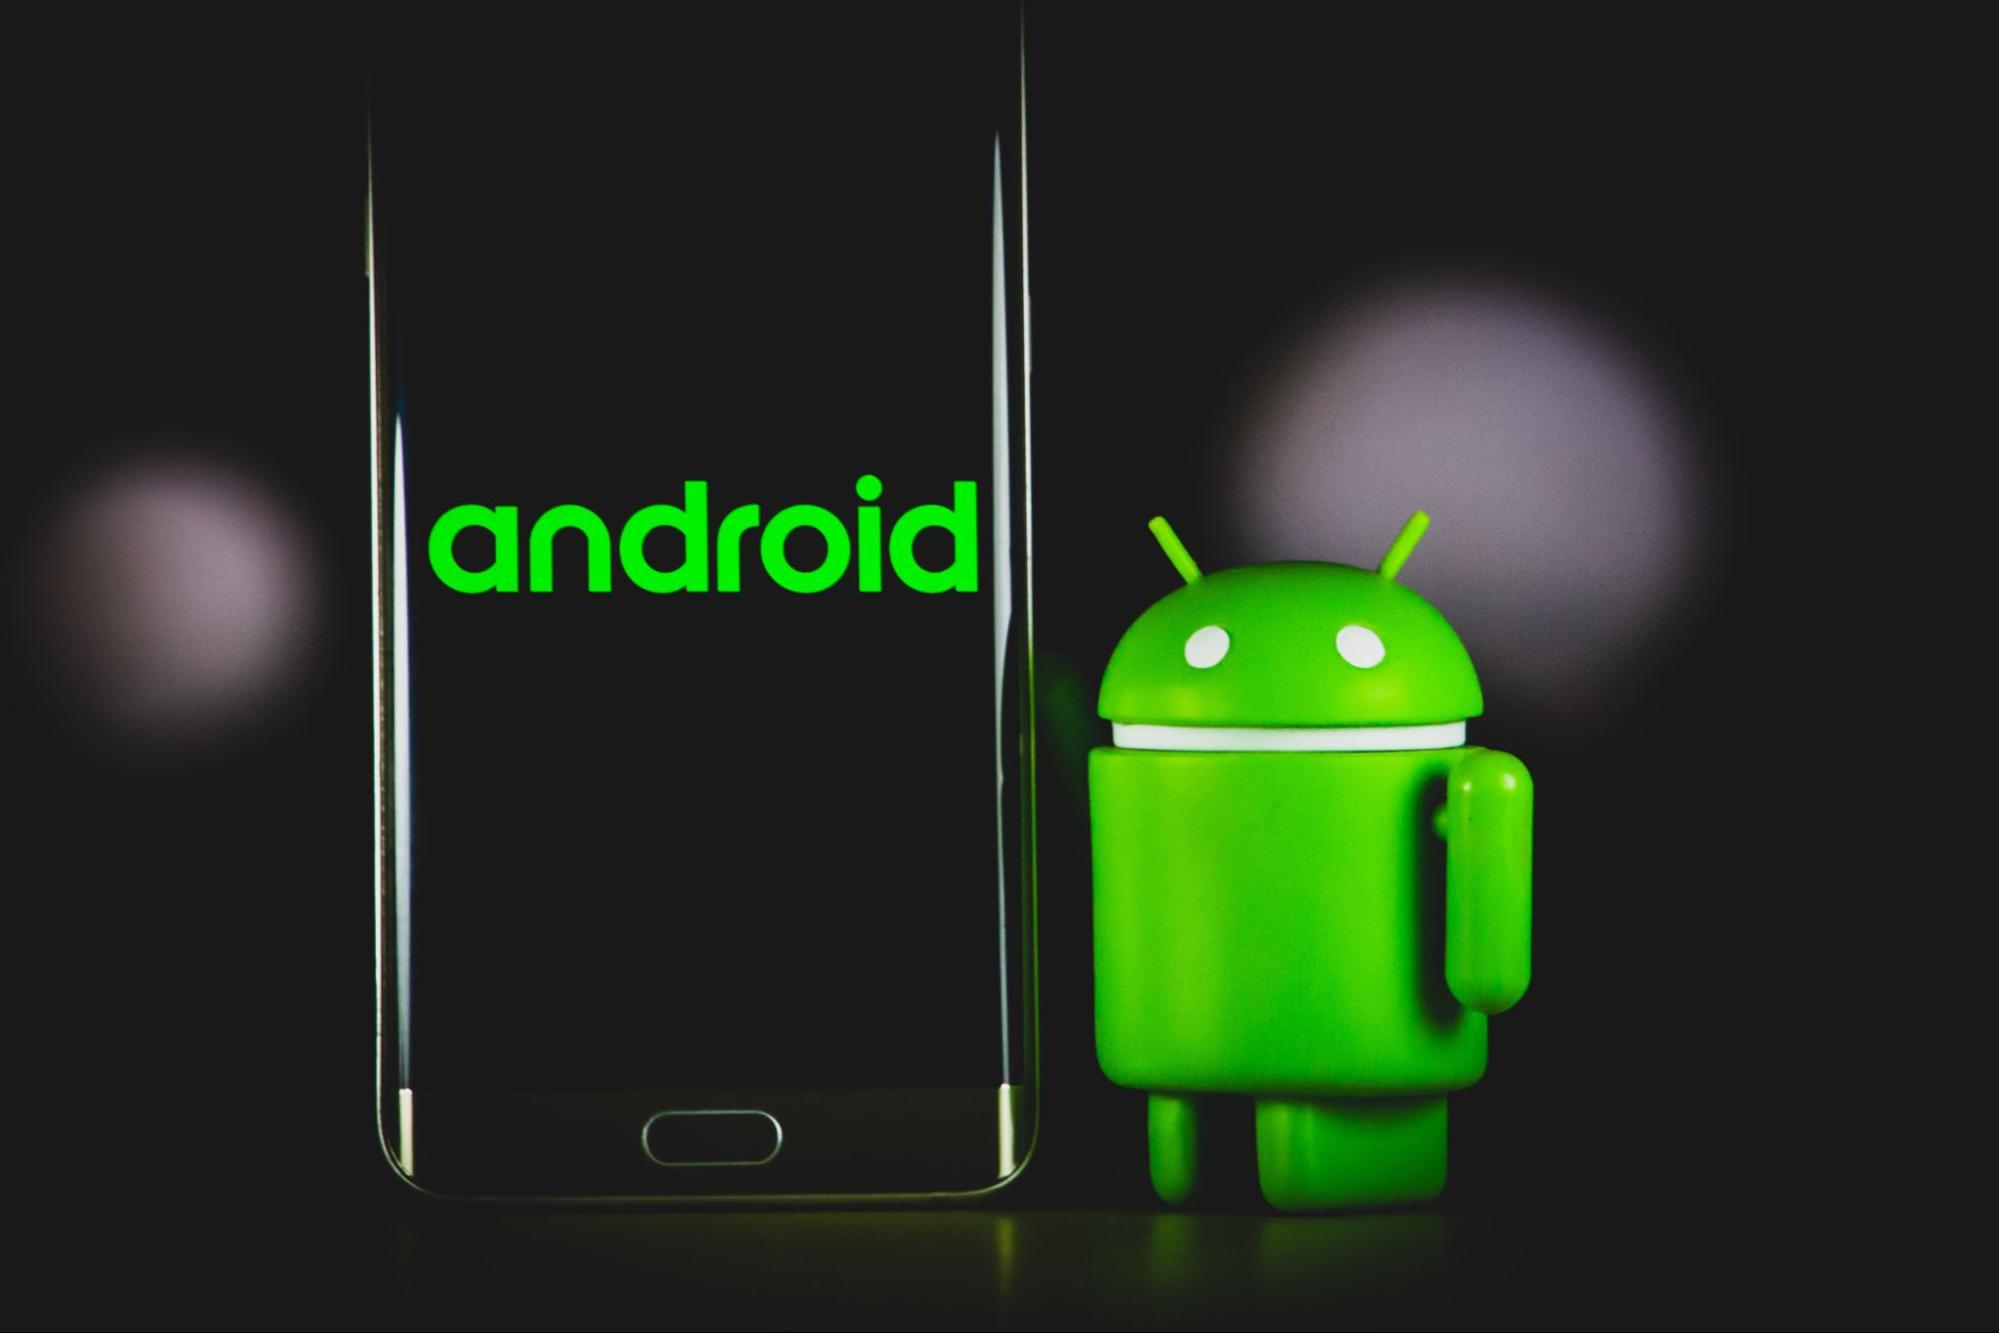 Goldoson Malware Infects Android App With Over 100M Installs